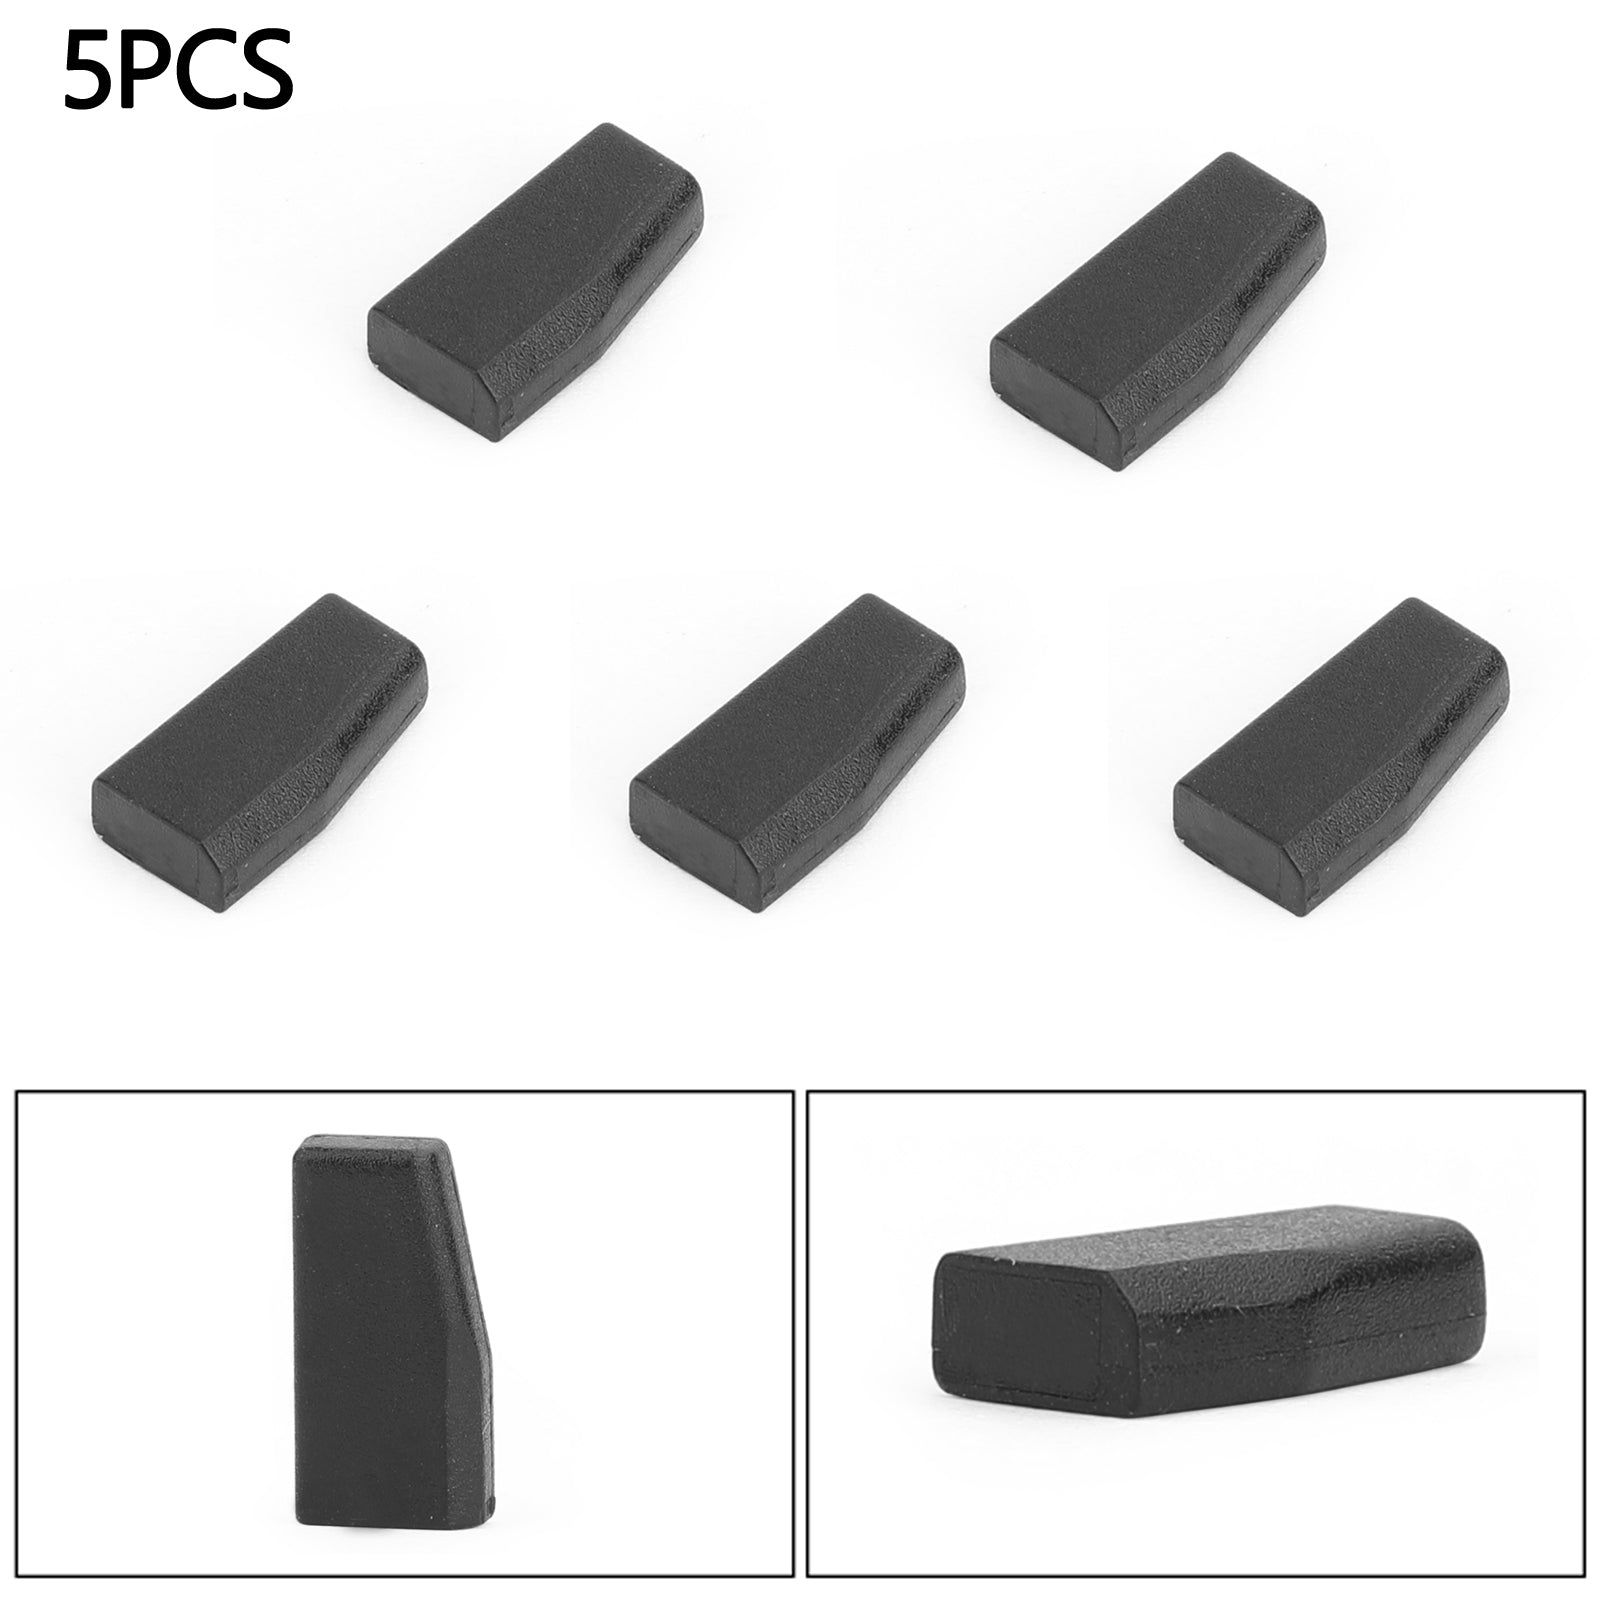 5 pz PCF7936 Chip ID46 PCF7936AS Blank Transponder (Sostituisce PCF7936) Chiave generica compatibile